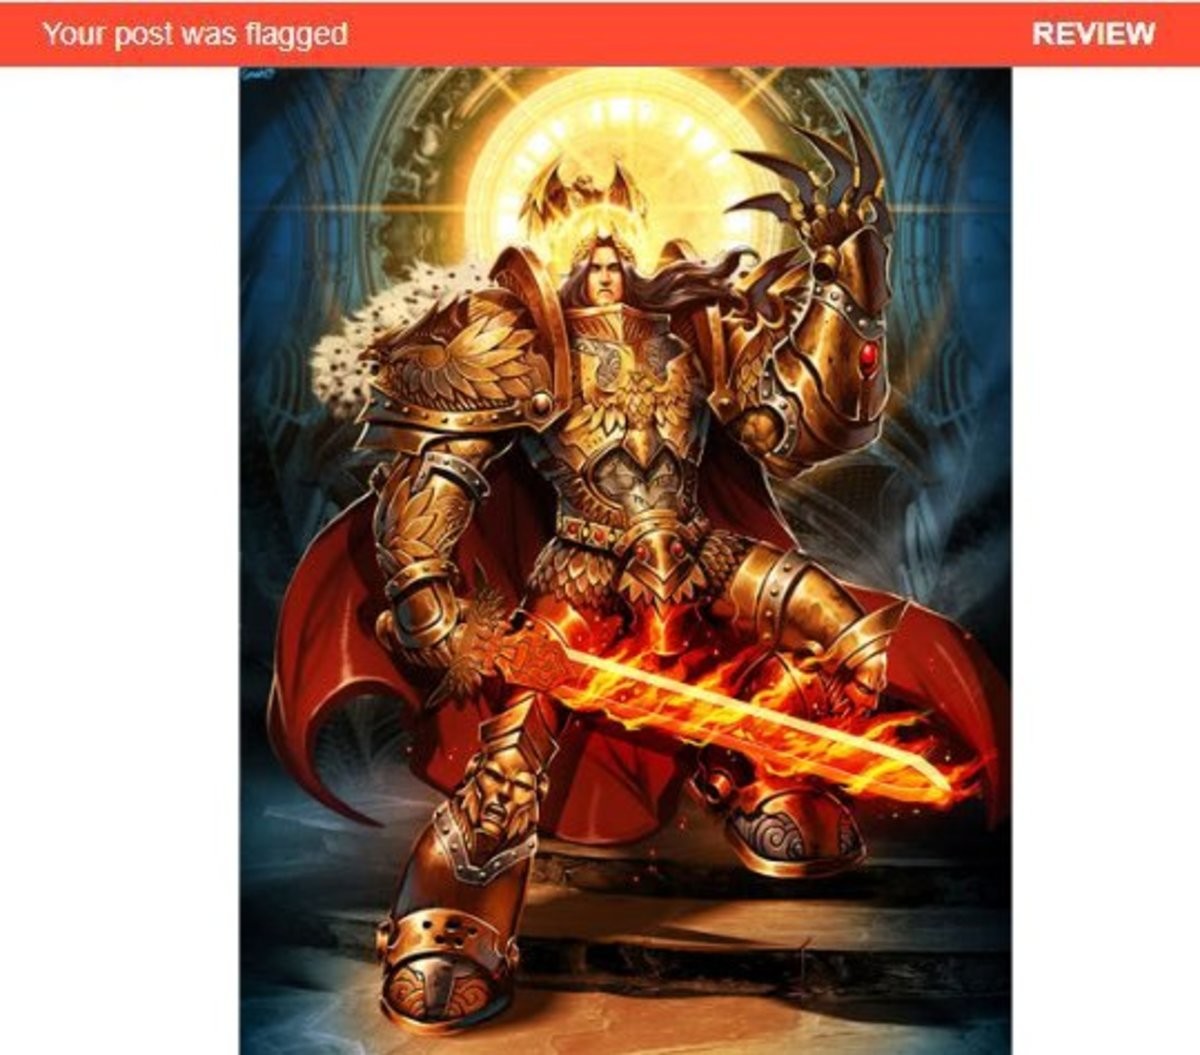 H E R E S Y. When Tumblr banned porn not because of being child friendly but because they're actually aligned with Khorne and wish to weaken Slaanesh... Purge when?